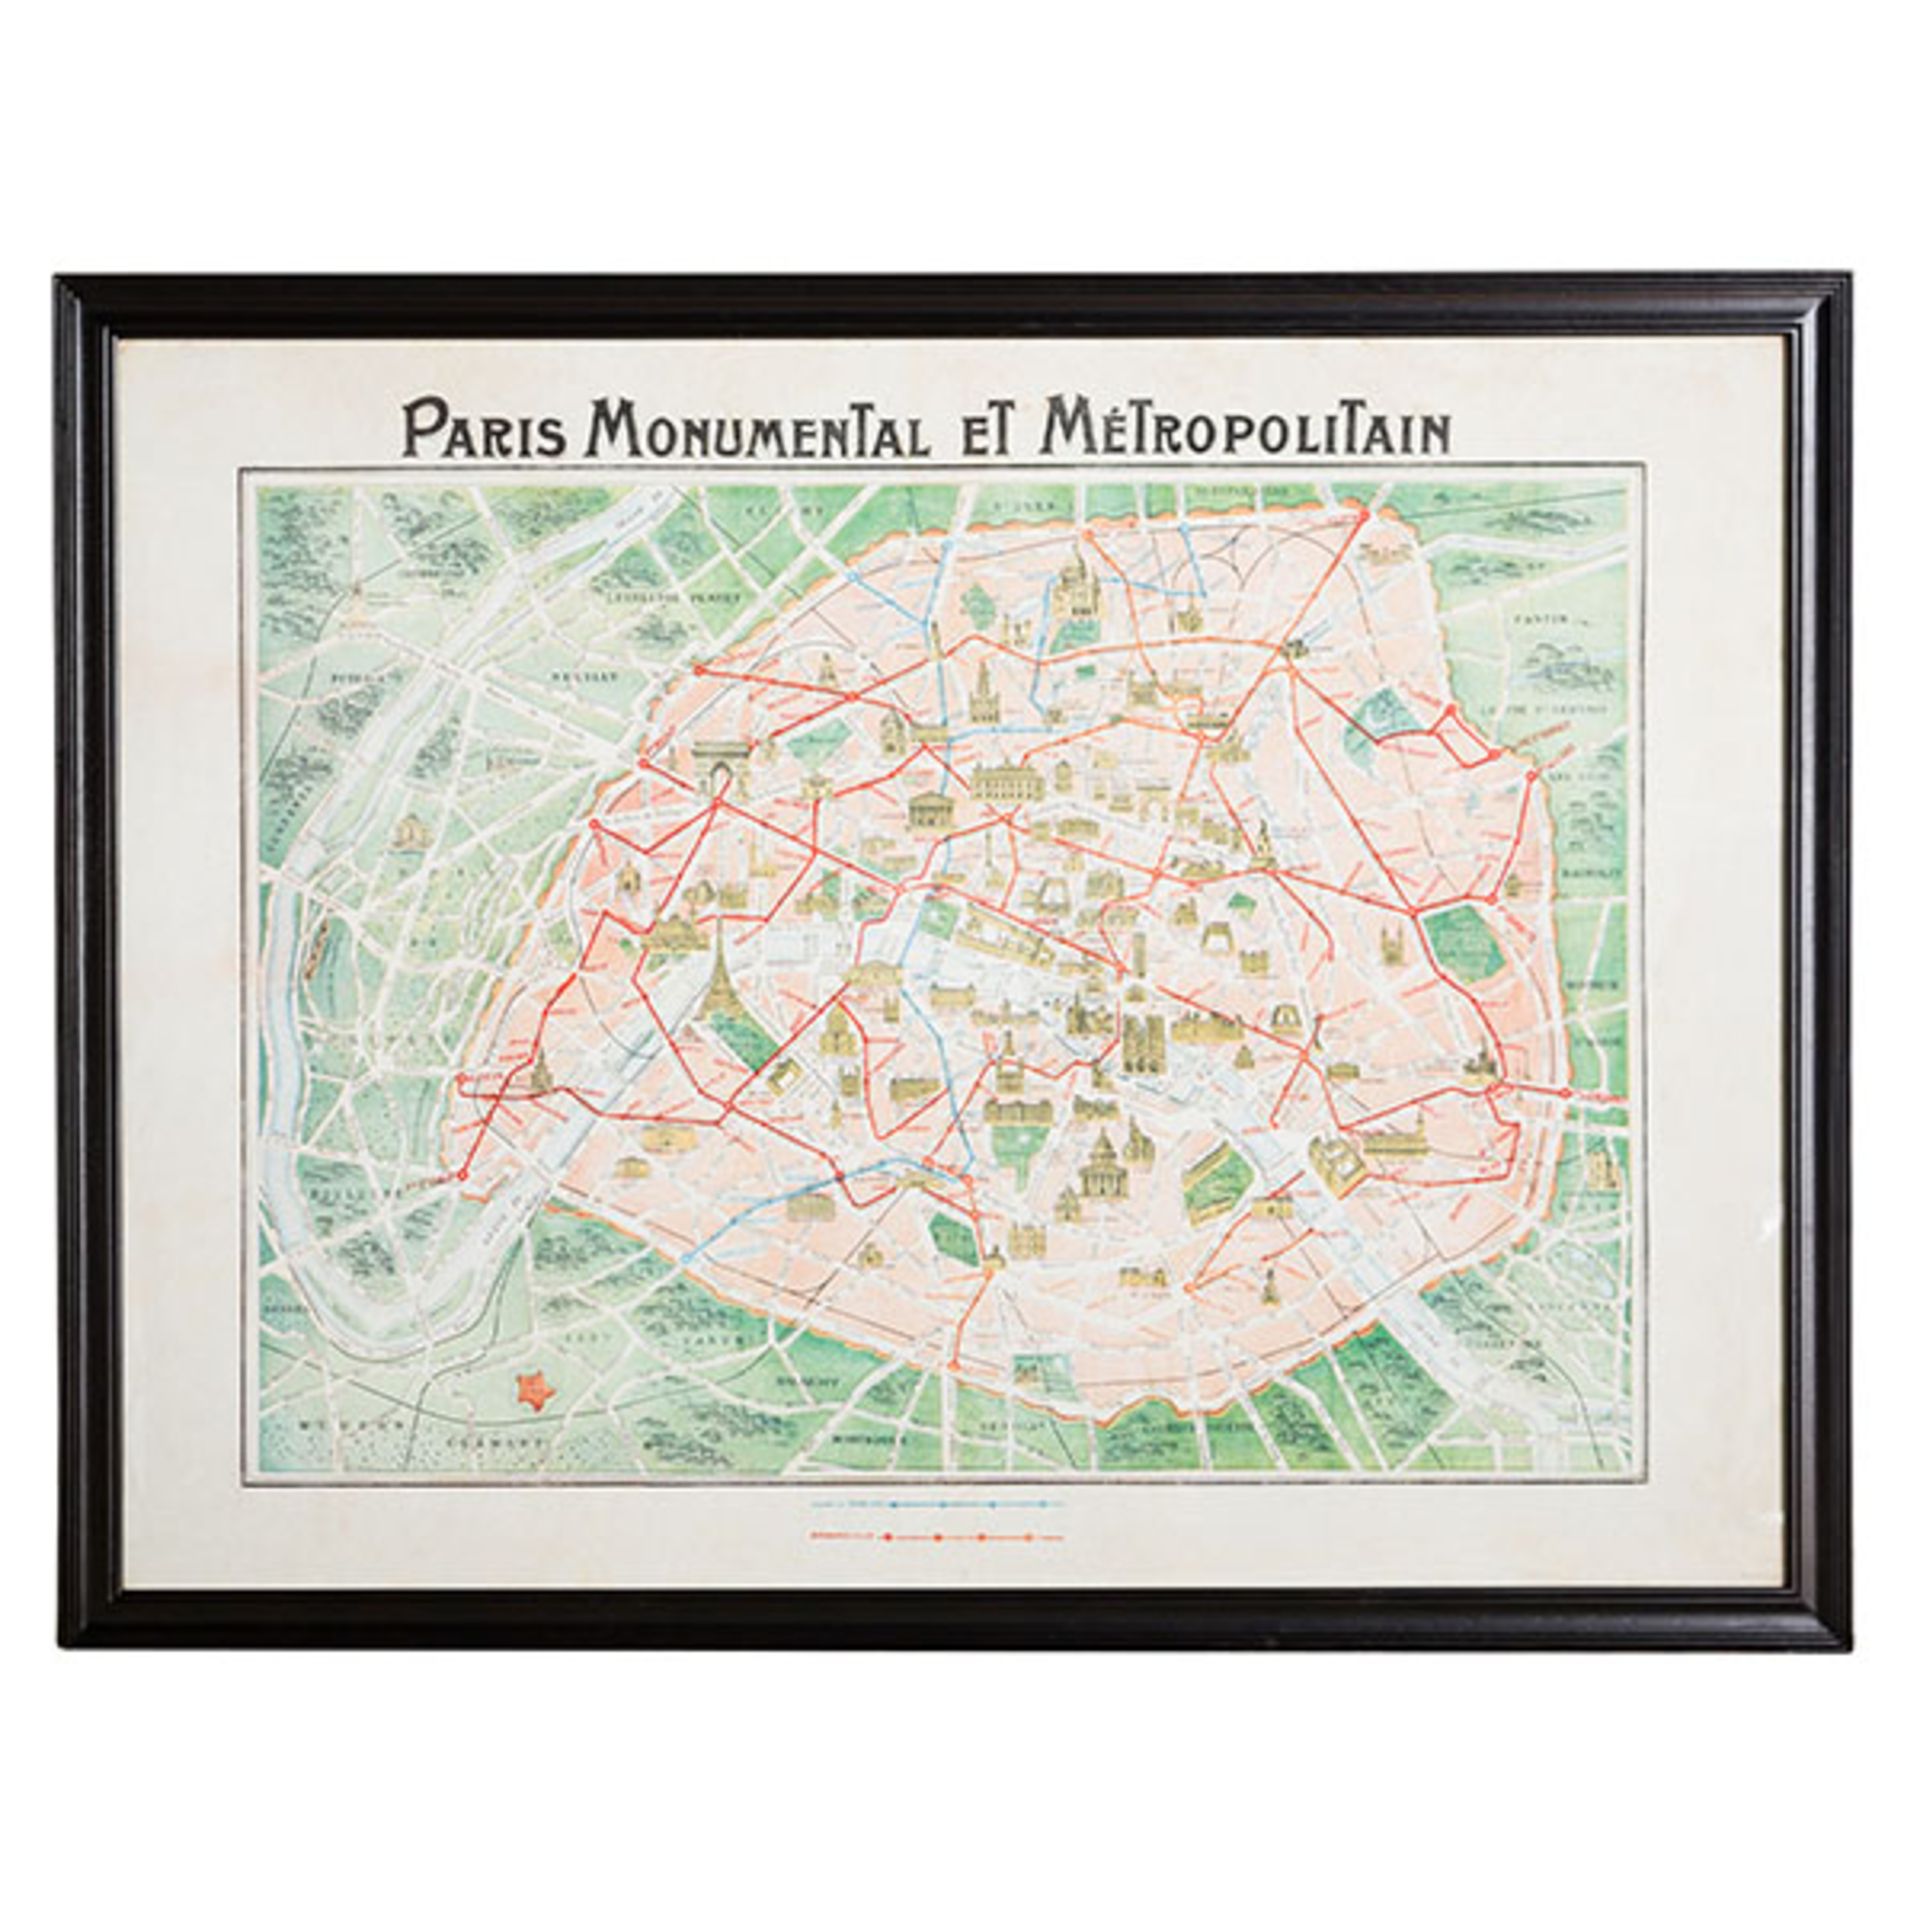 Capital Map Paris These Unframed City Maps Pay Homage To Each City's History And The Life Stories Of - Image 2 of 2